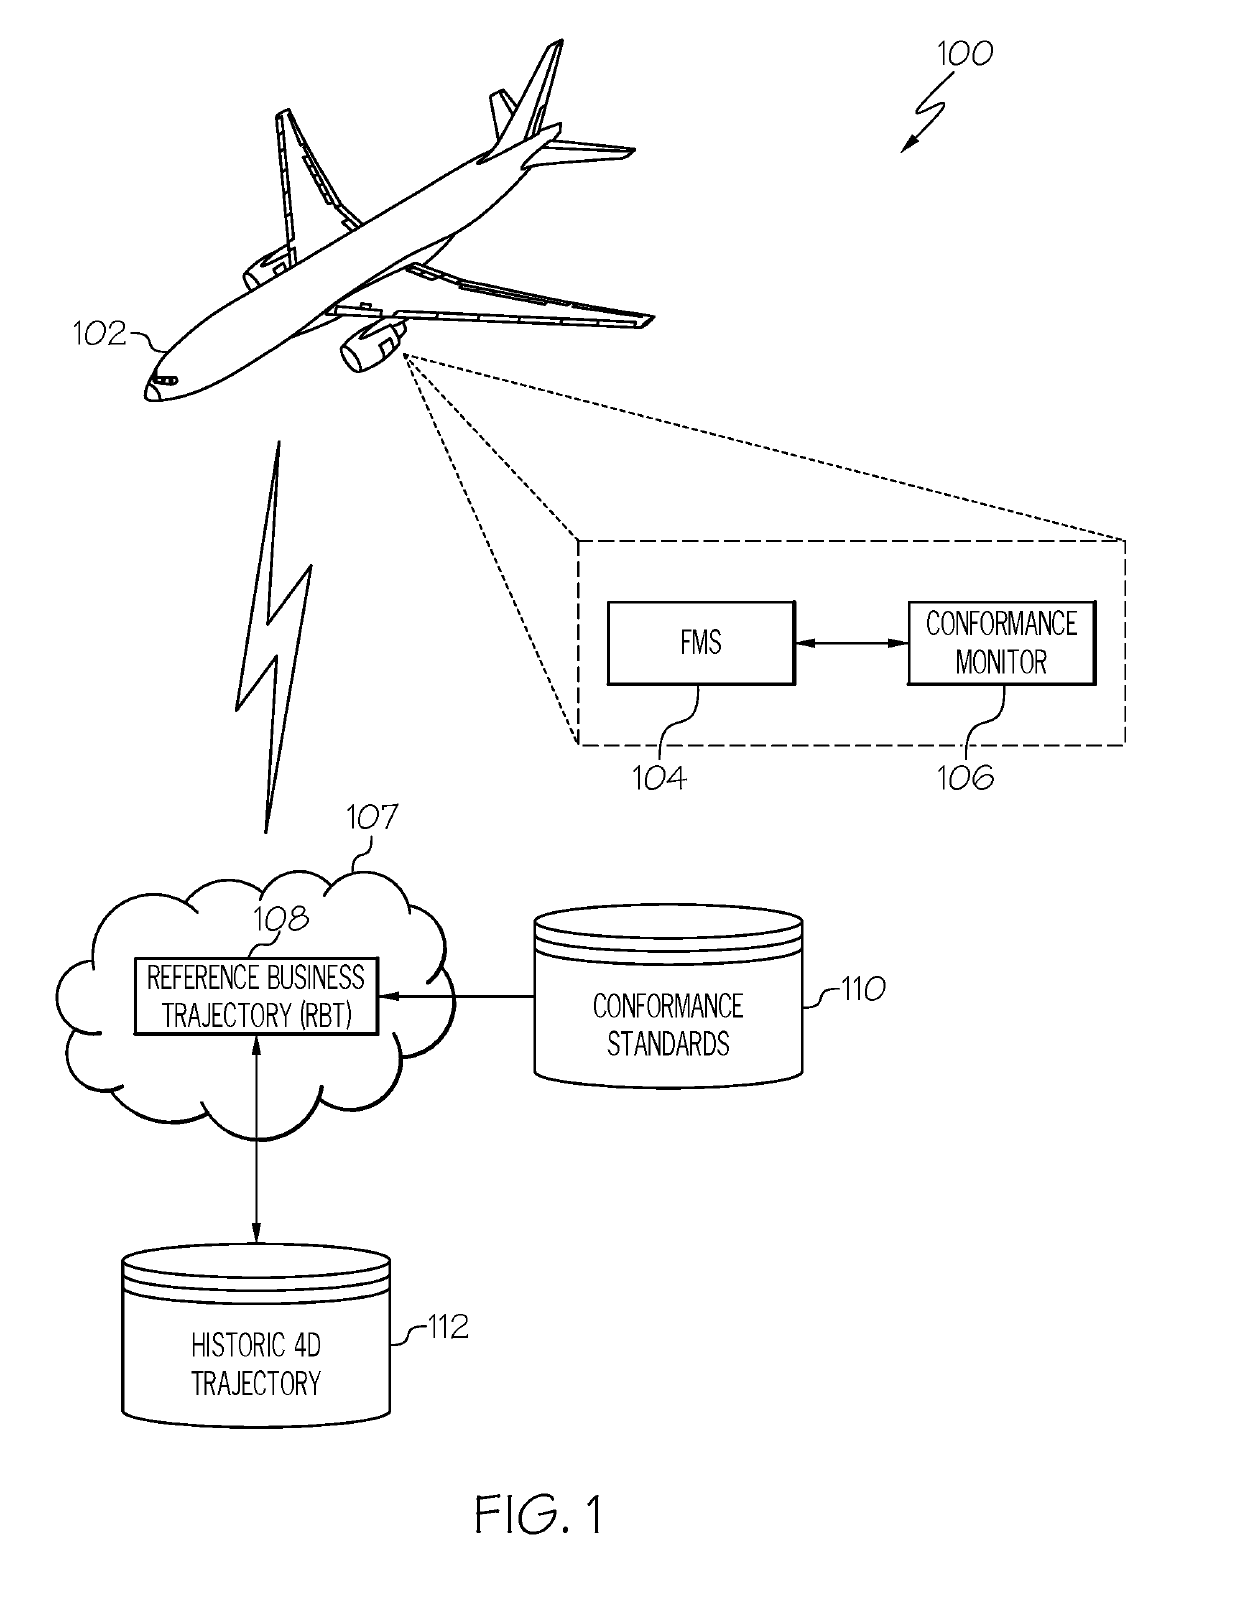 System and method for monitoring conformance of an aircraft to a reference 4-dimensional trajectory